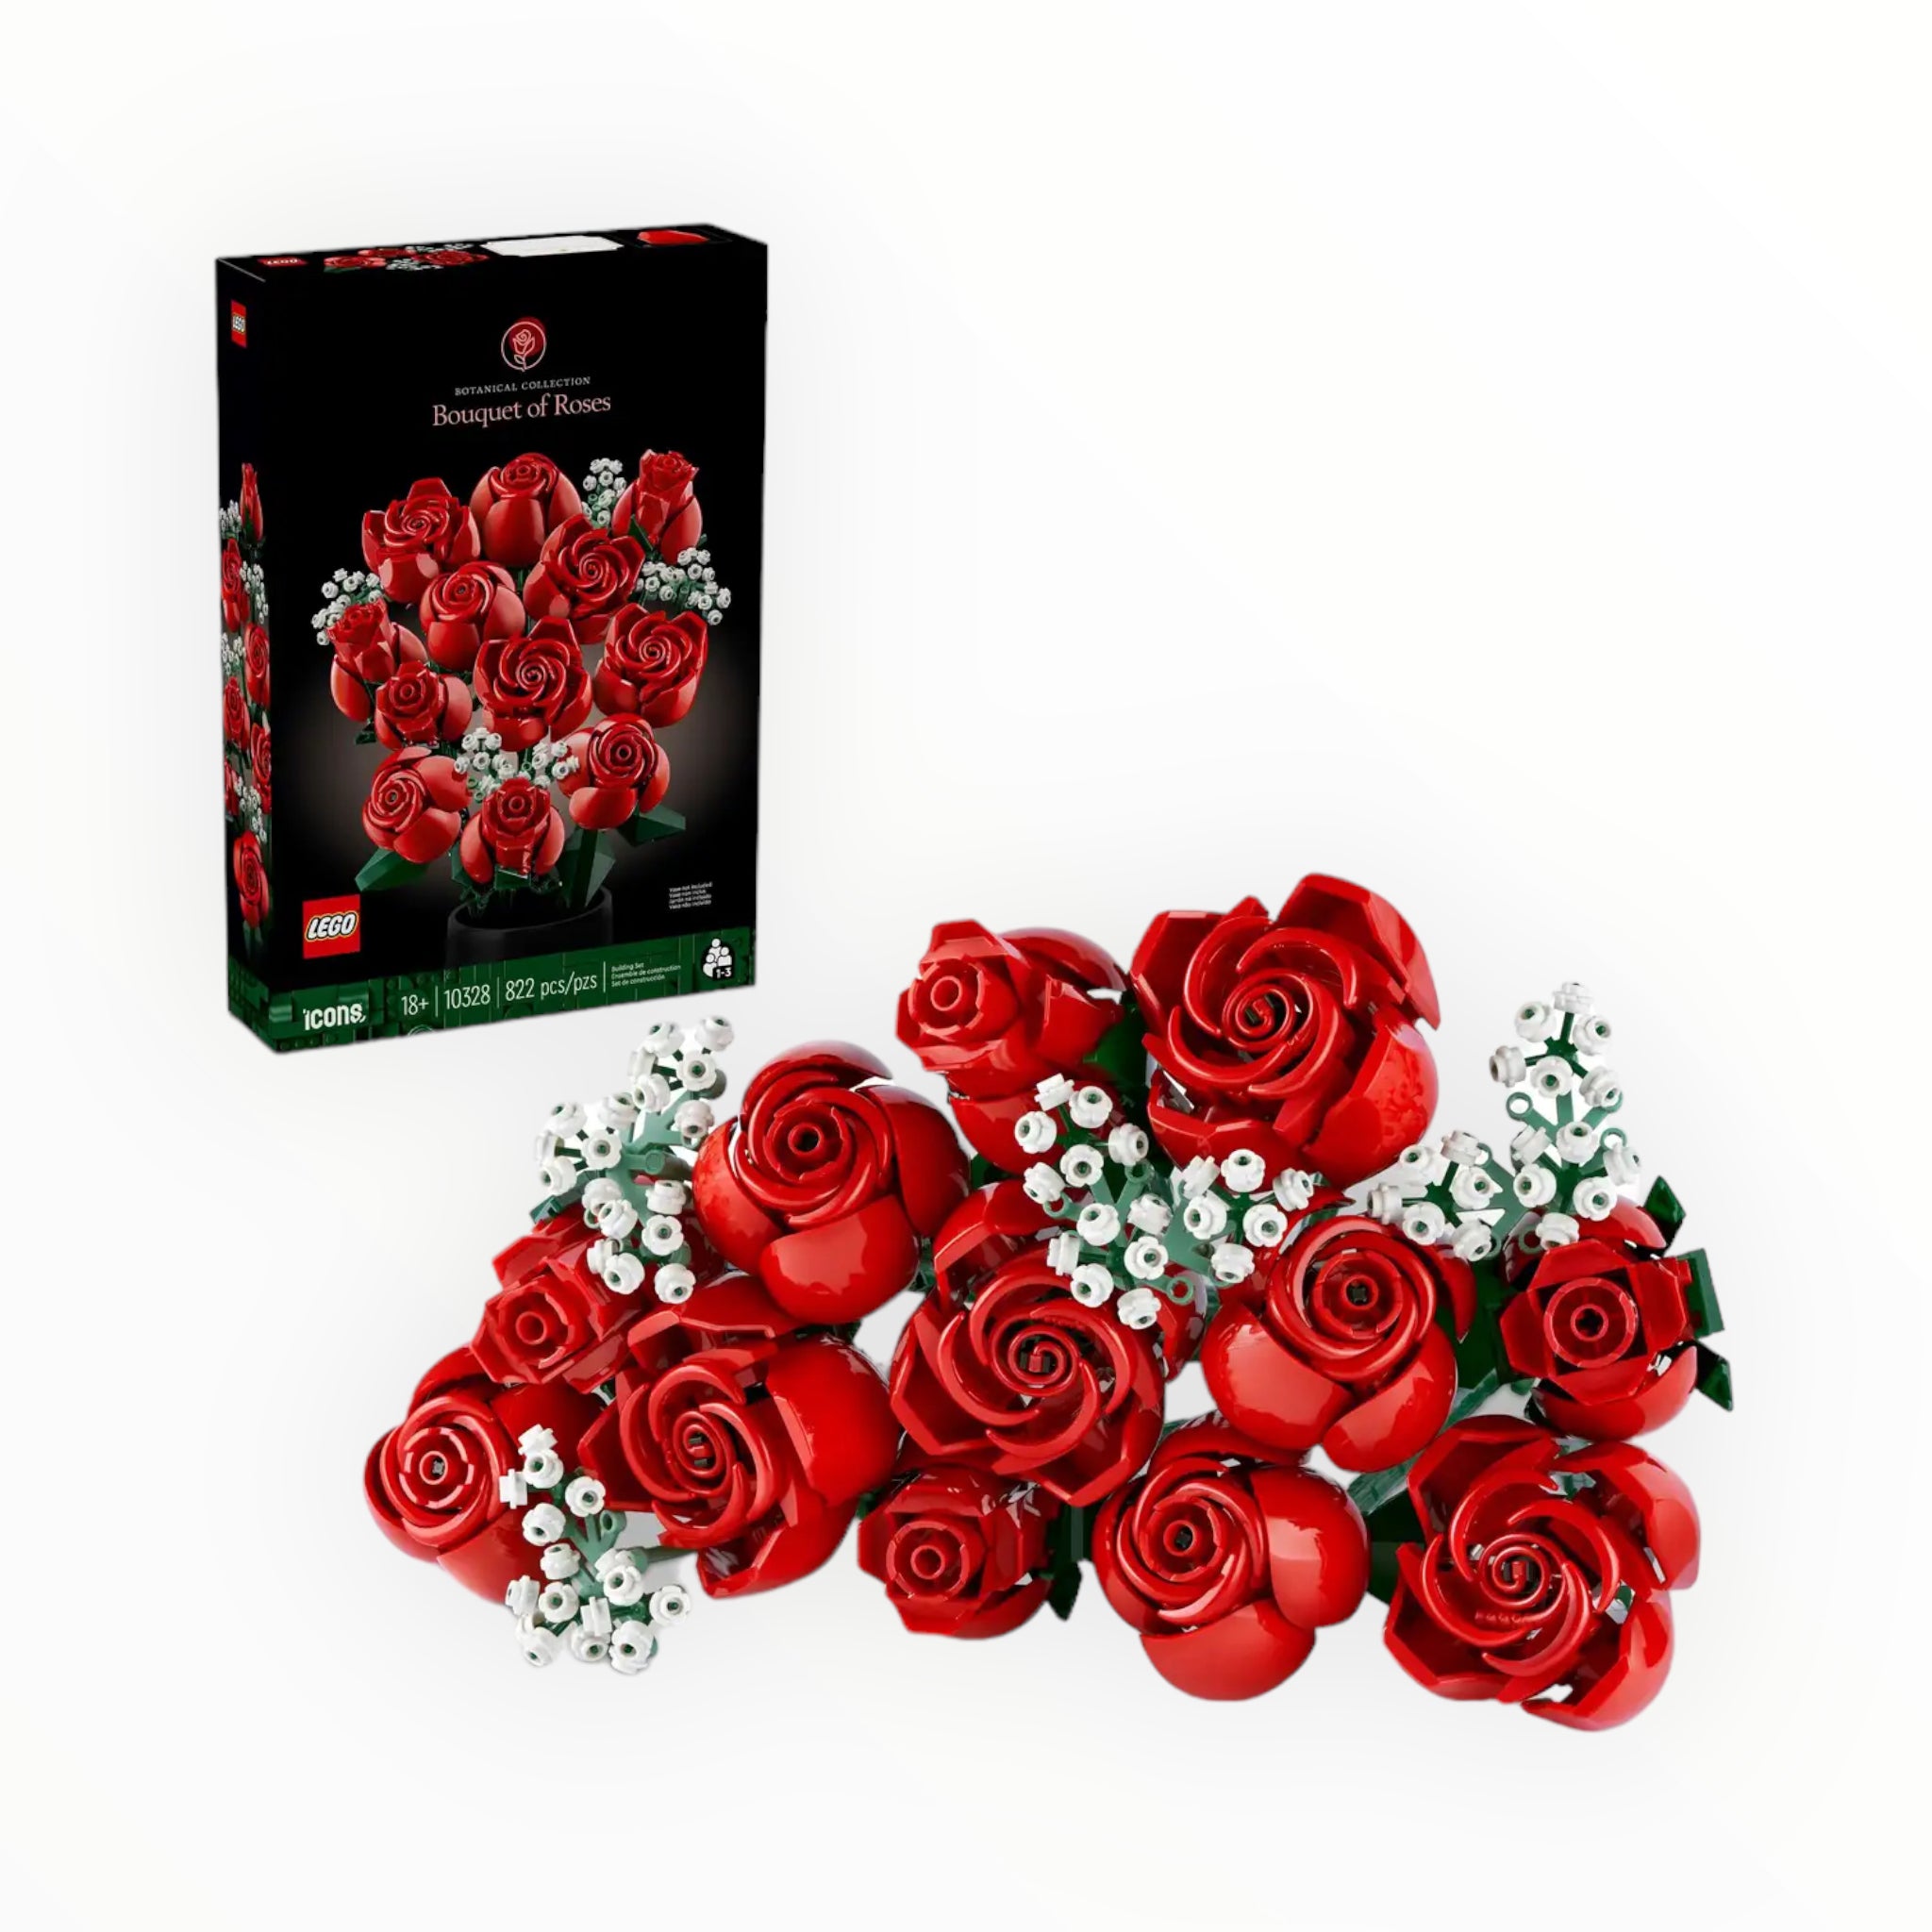 10328 Botanical Collection Bouquet of Roses